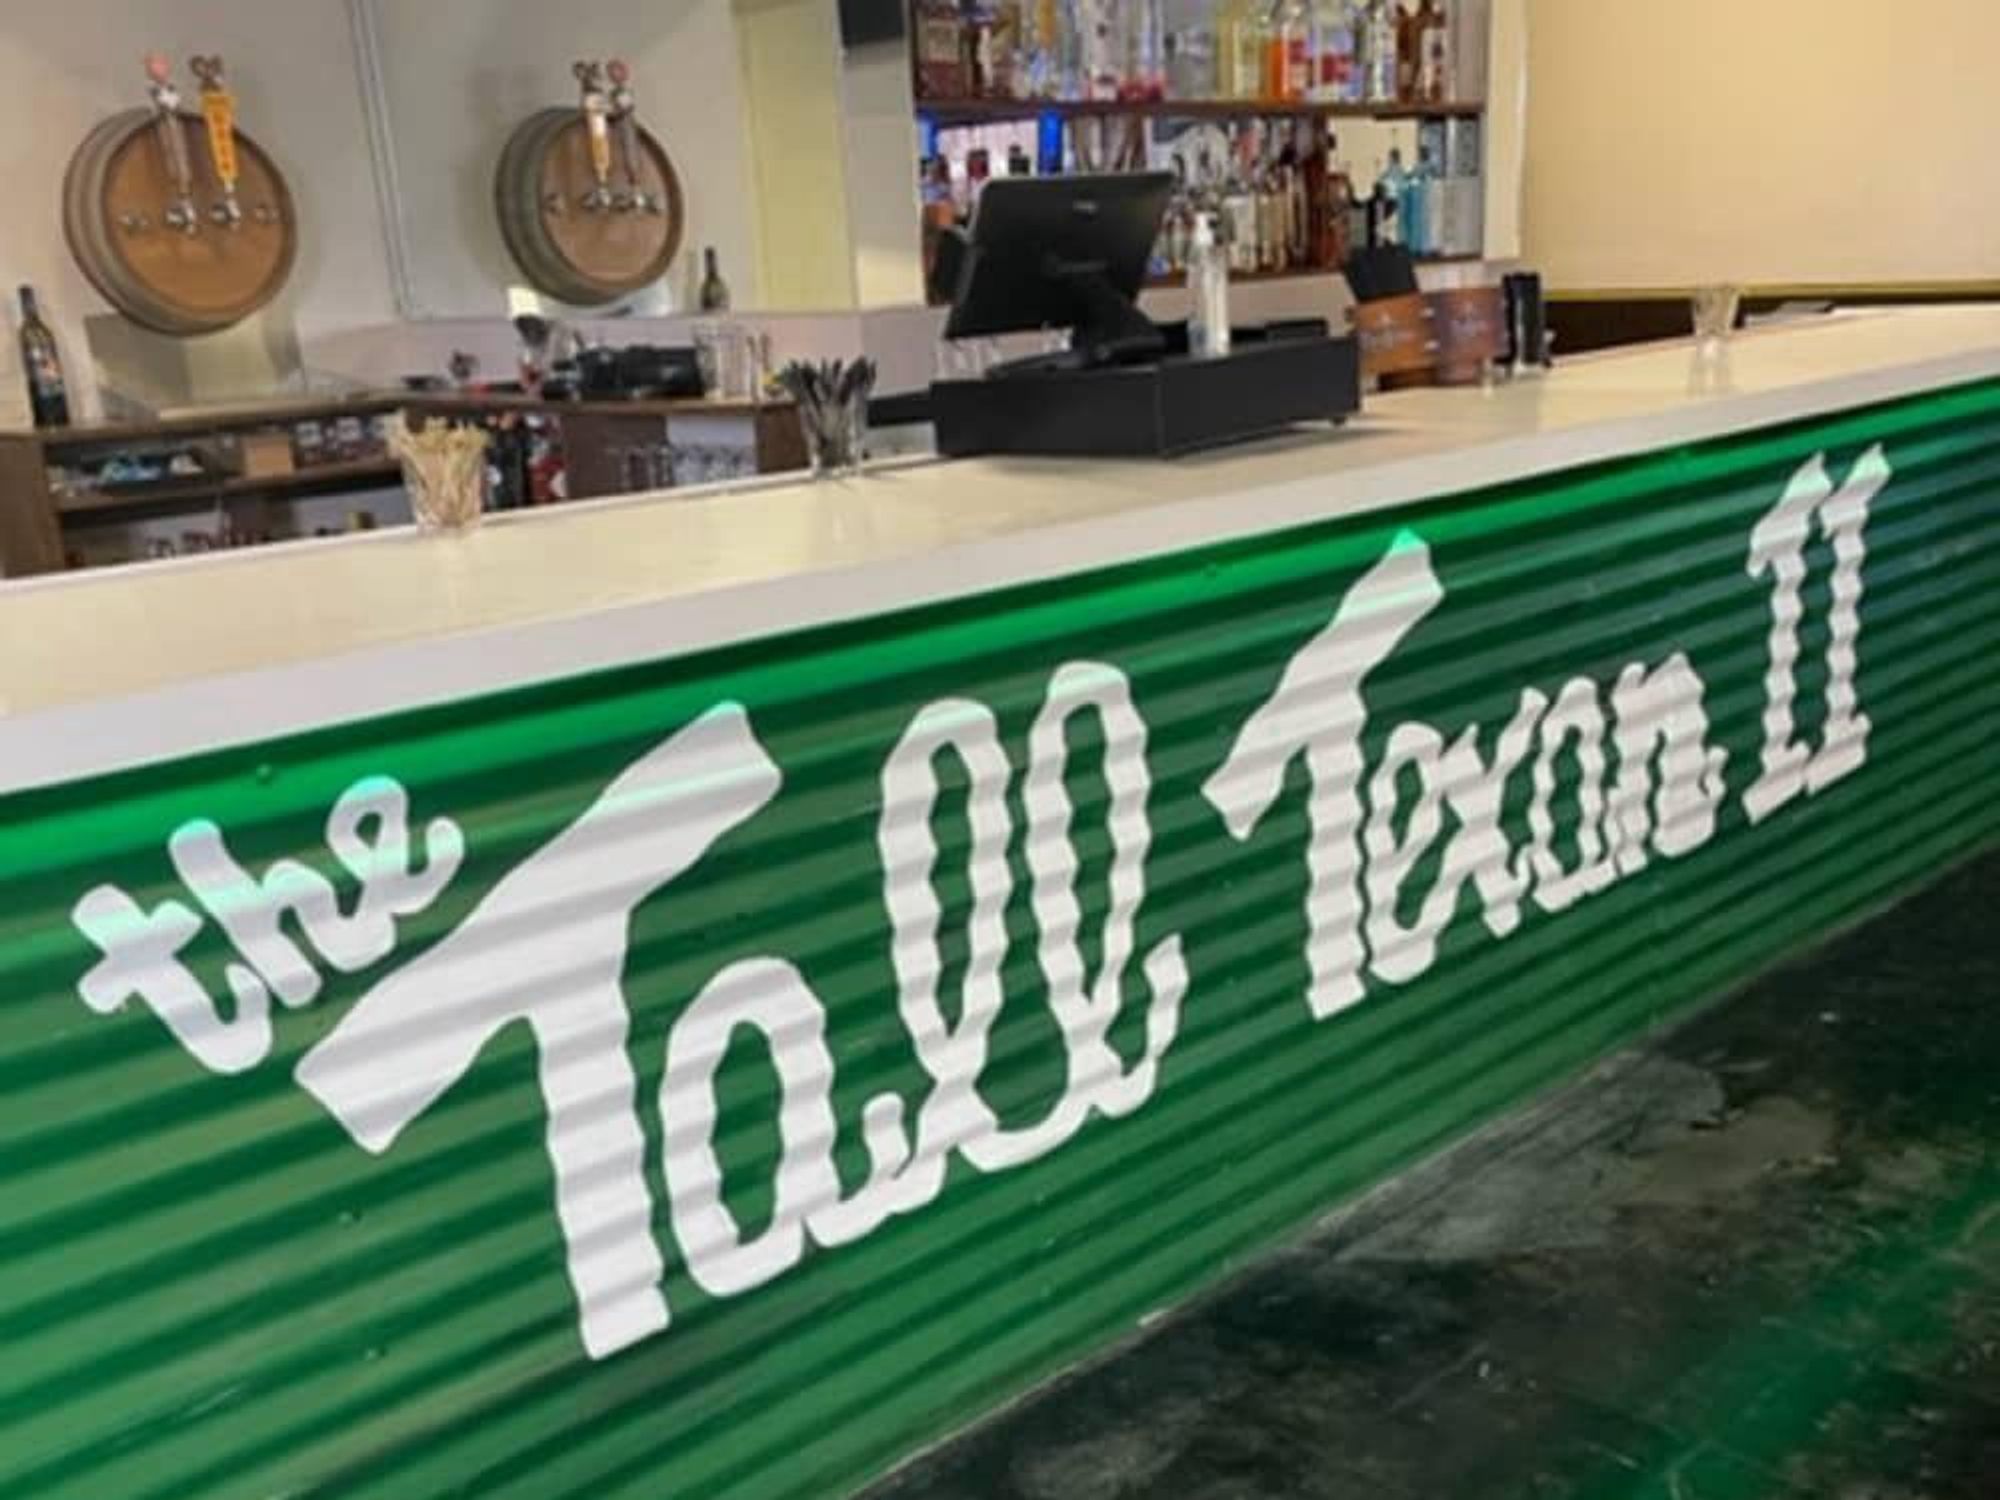 The Tall Texan has reopened under new ownership.